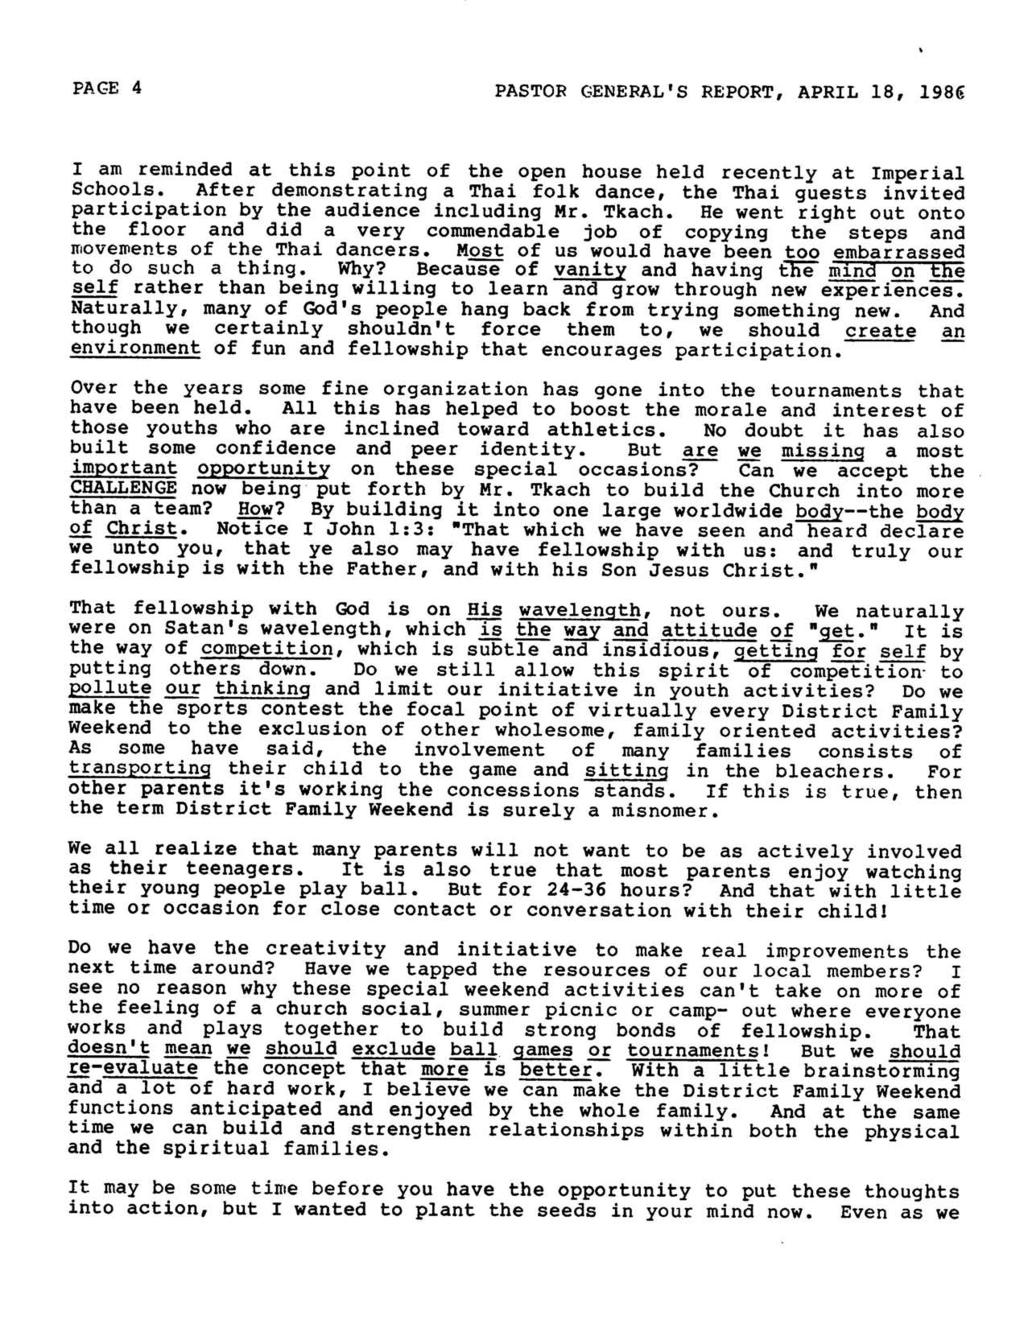 \ PAGE 4 PASTOR GENERAL'S REPORT, APRIL 18, 1986 I am reminded at this point of the open house held recently at Imperial Schools.